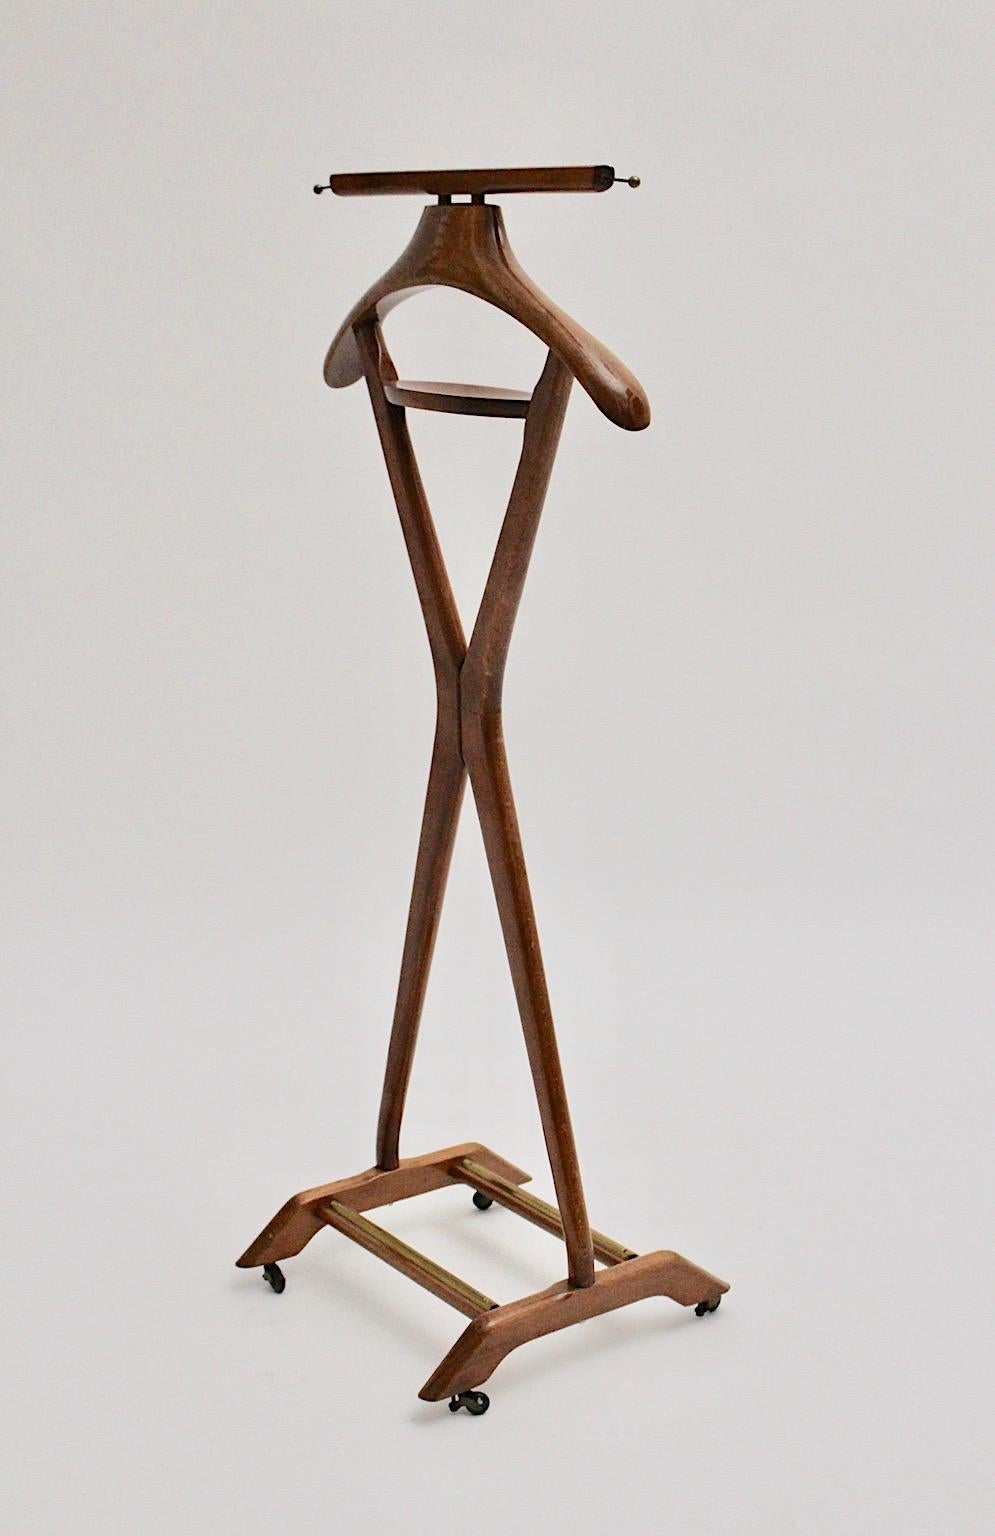 Mid-Century Modern vintage valet or coat rack from beech in warm brown color by Ico Parisi for Fratelli Reguitti 1950s Italy.
Throughout its amazing X form the valet or coat rack shows a slightly tapered shape, which is giving a certain